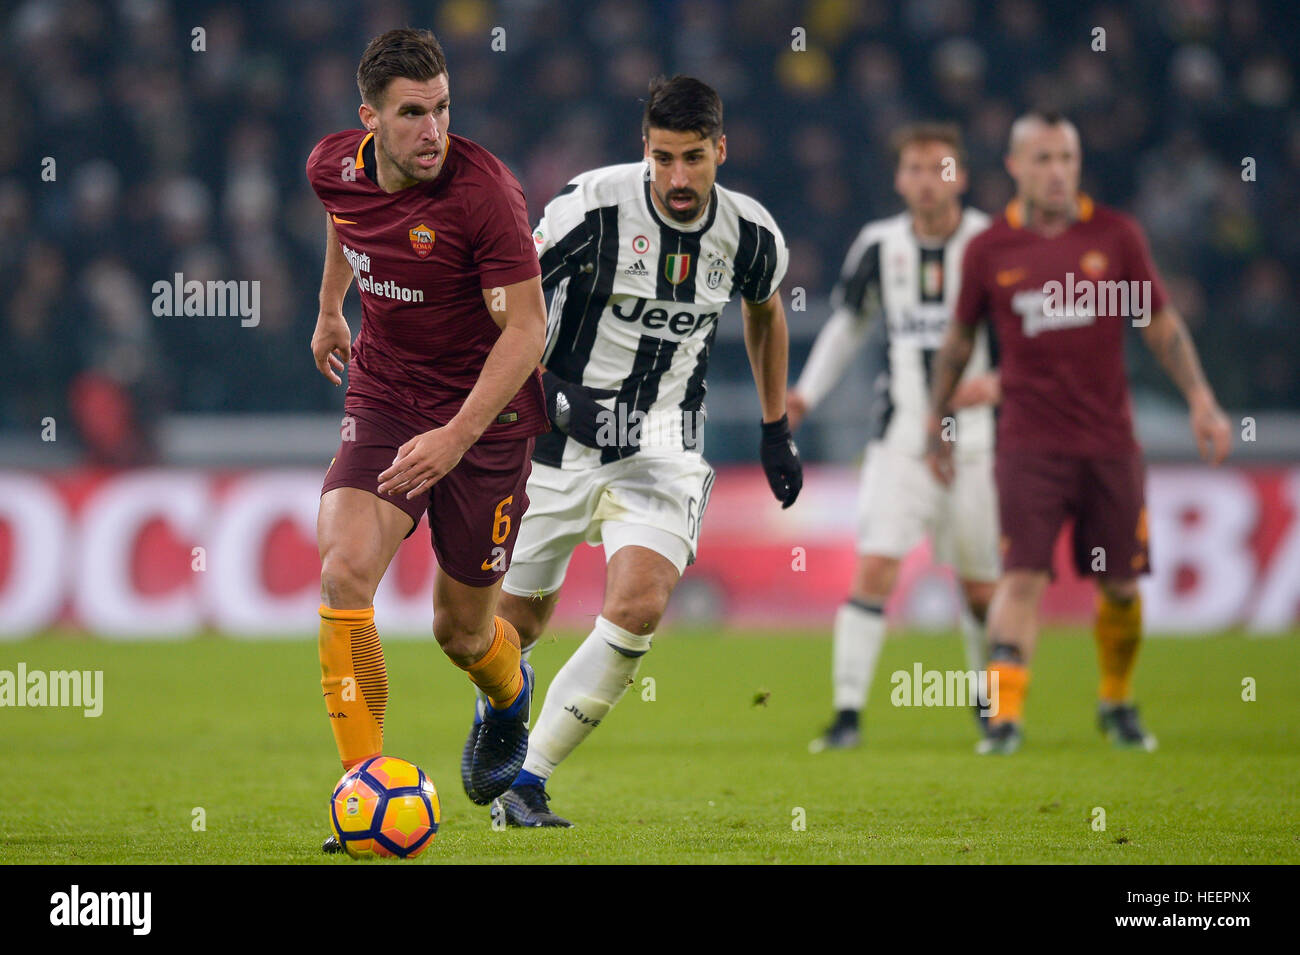 Turin, Italy. 2016, 17 december: Kevin Strootman (left) of AS Roma and Sami Khedira of Juventus FC comepte for the ball during the Serie A football ma Stock Photo